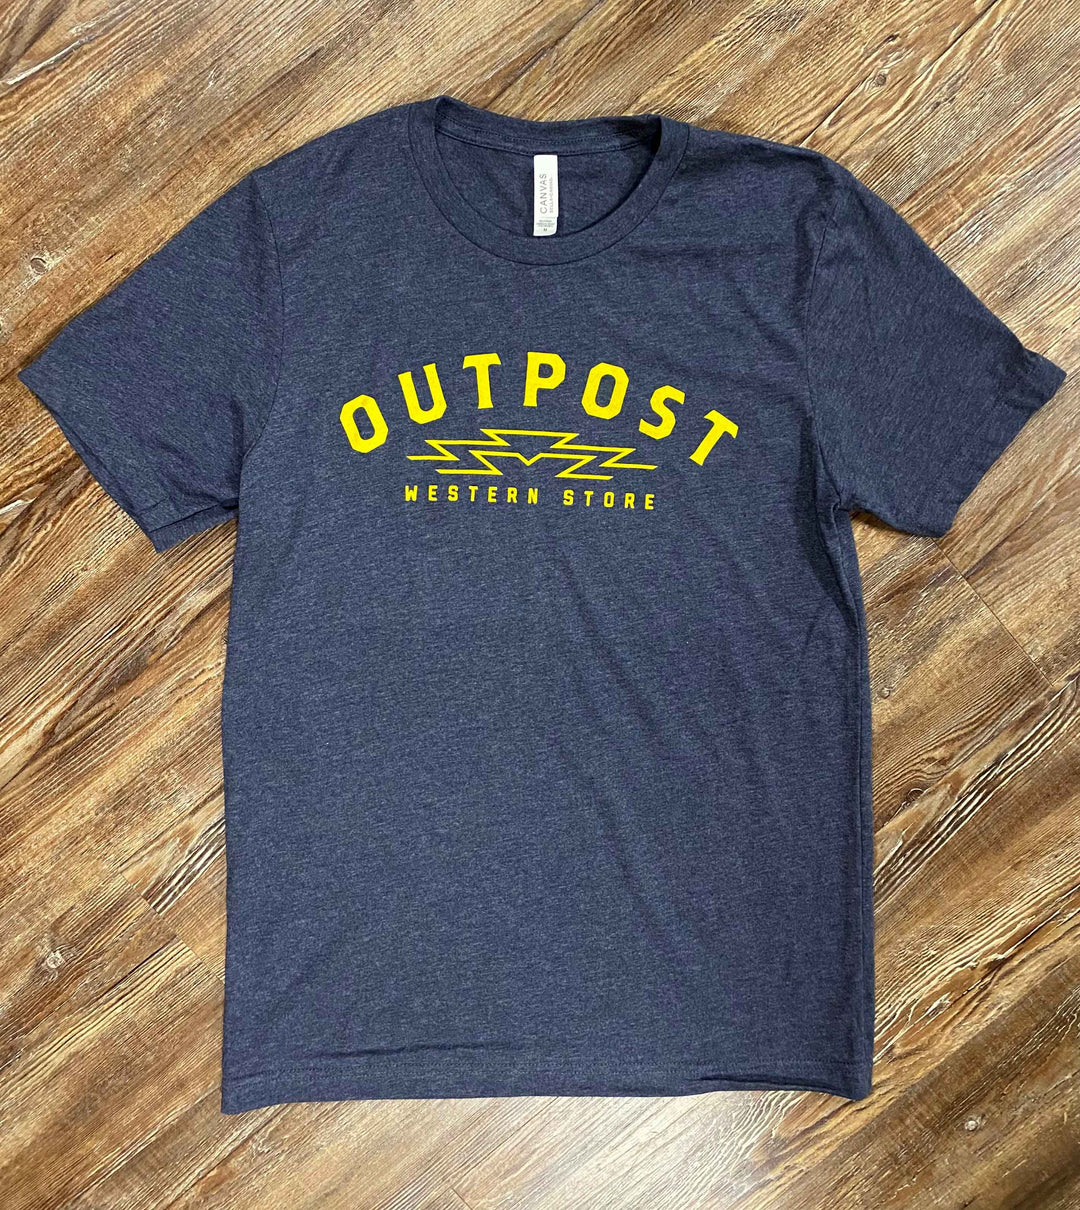 Outpost Sunrise Logo Tee, blue heather with yellow gold screen print